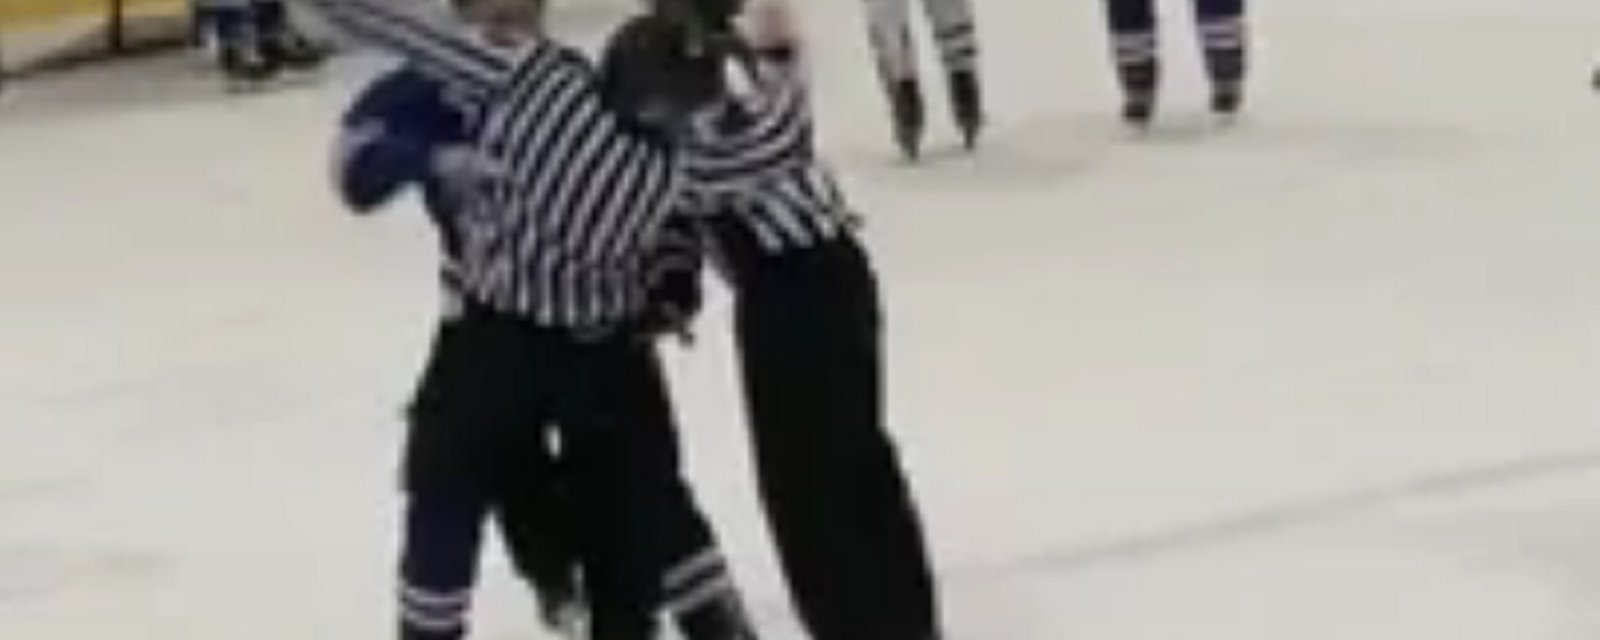 Player violently assaults referee during 'friendly' hockey tournament.